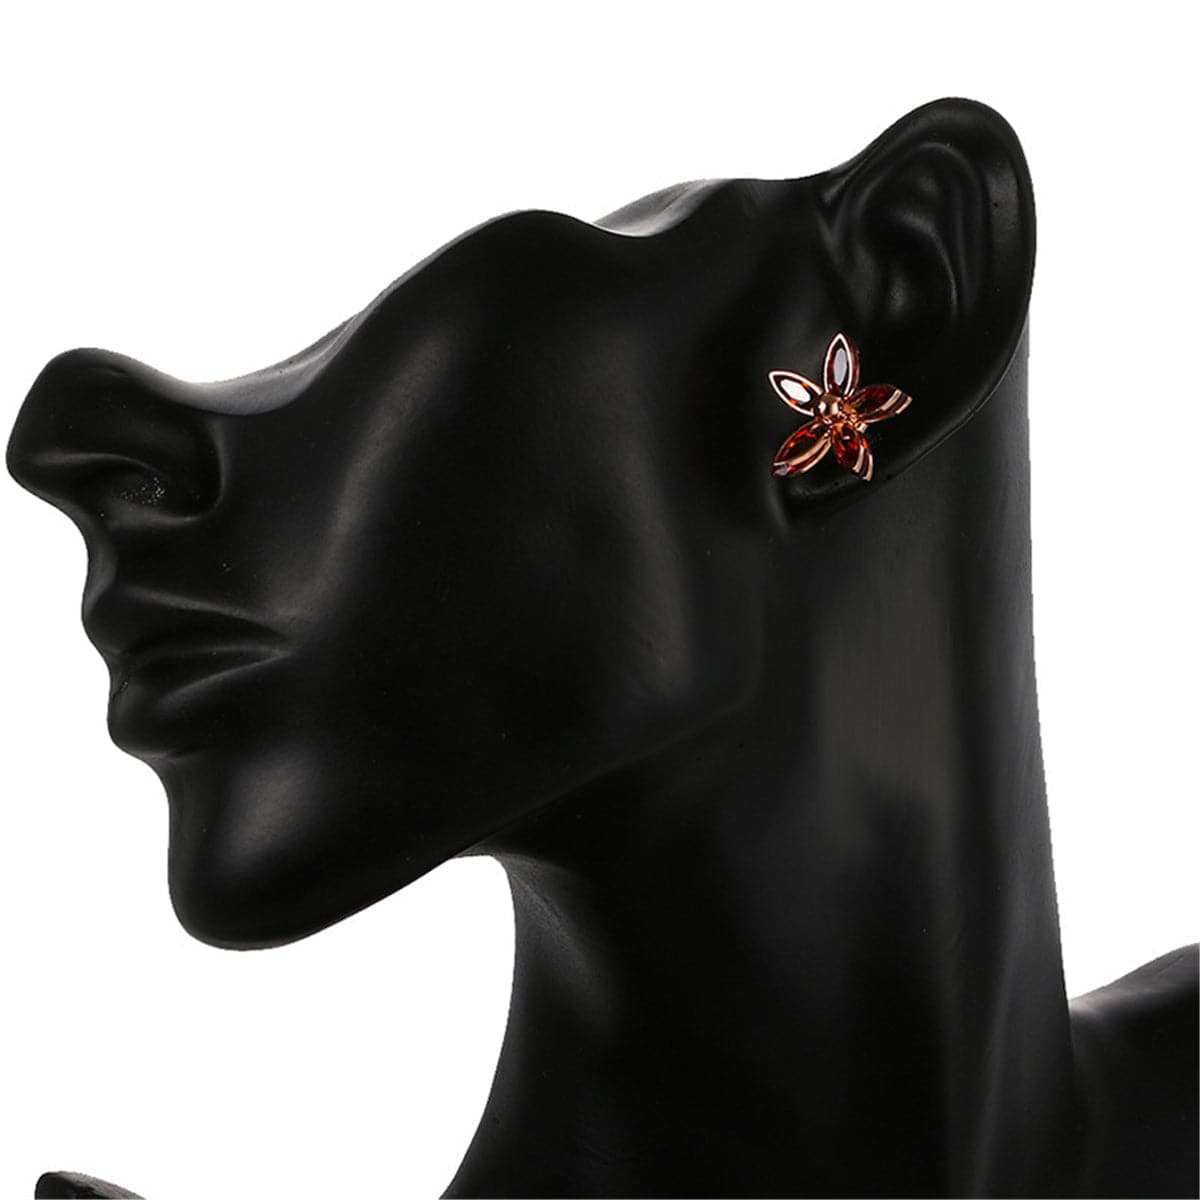 Red Crystal & 18K Rose Gold-Plated Floral Stud Earrings